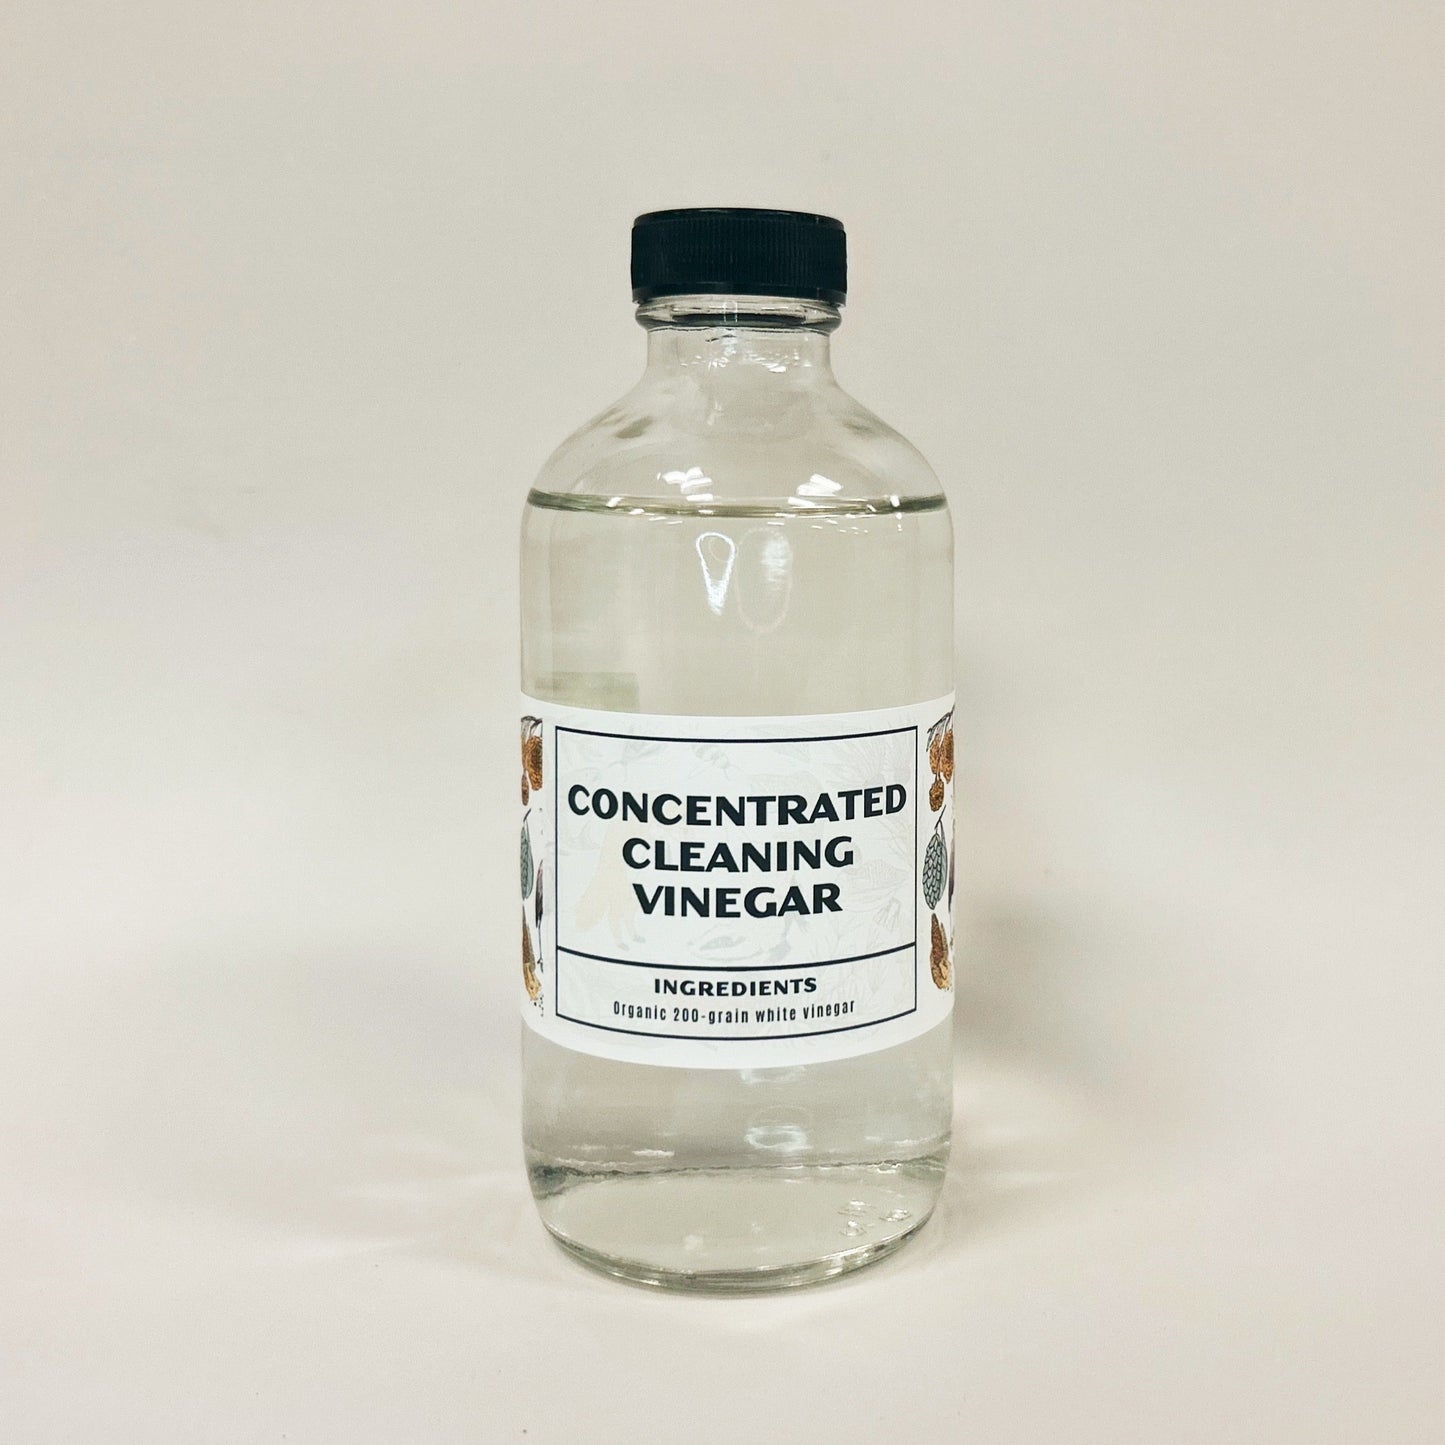 Concentrated Cleaning Vinegar